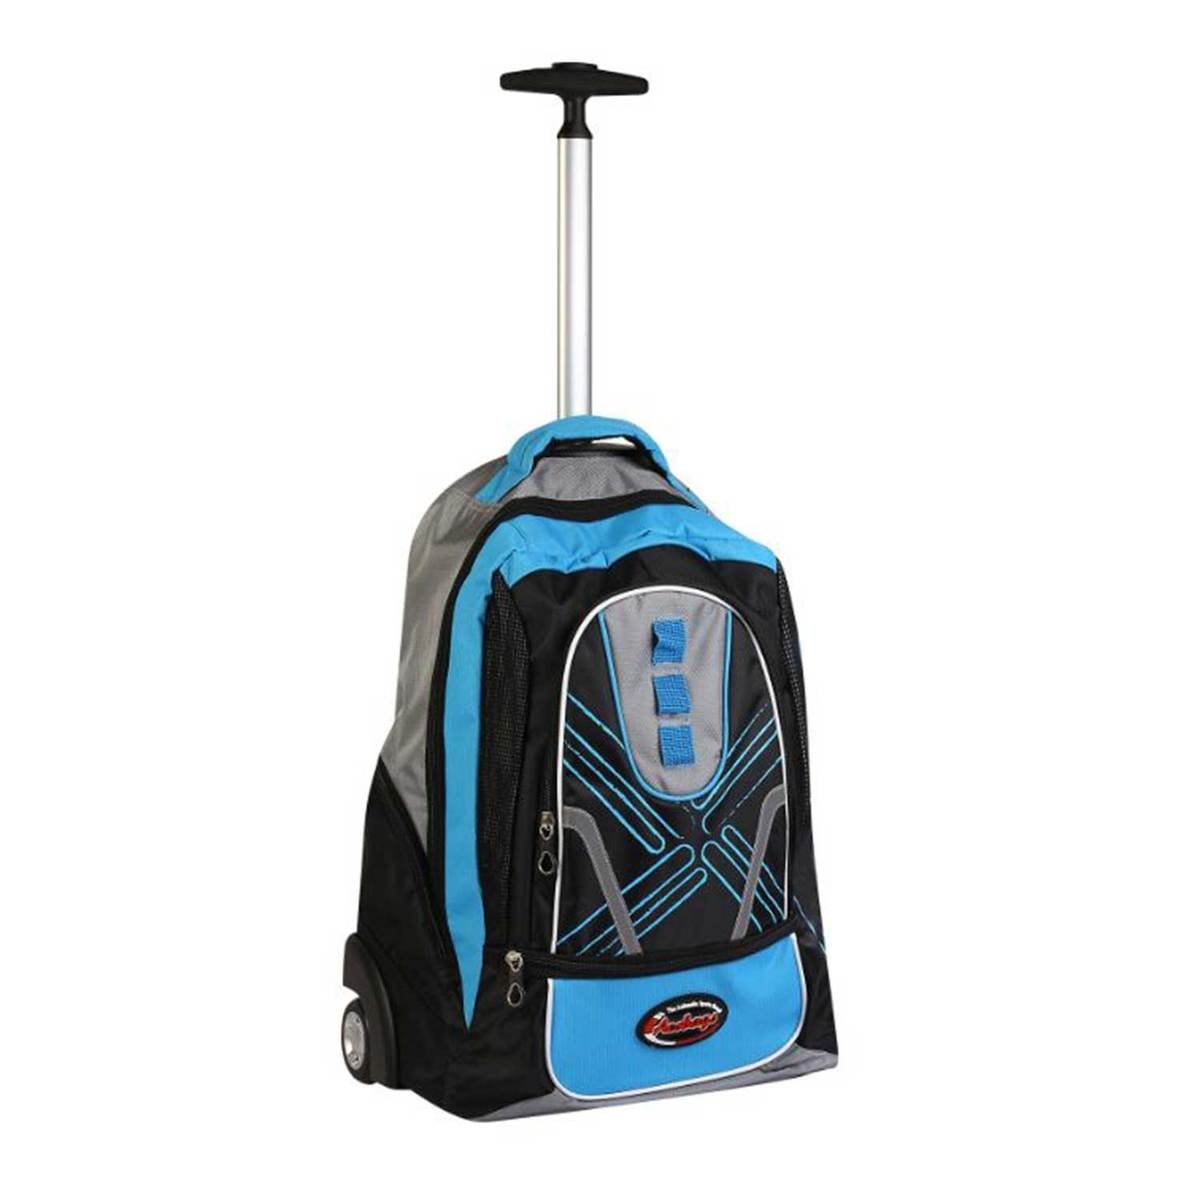 ACS Trolley Bag 1500-1A2T 19in Assorted